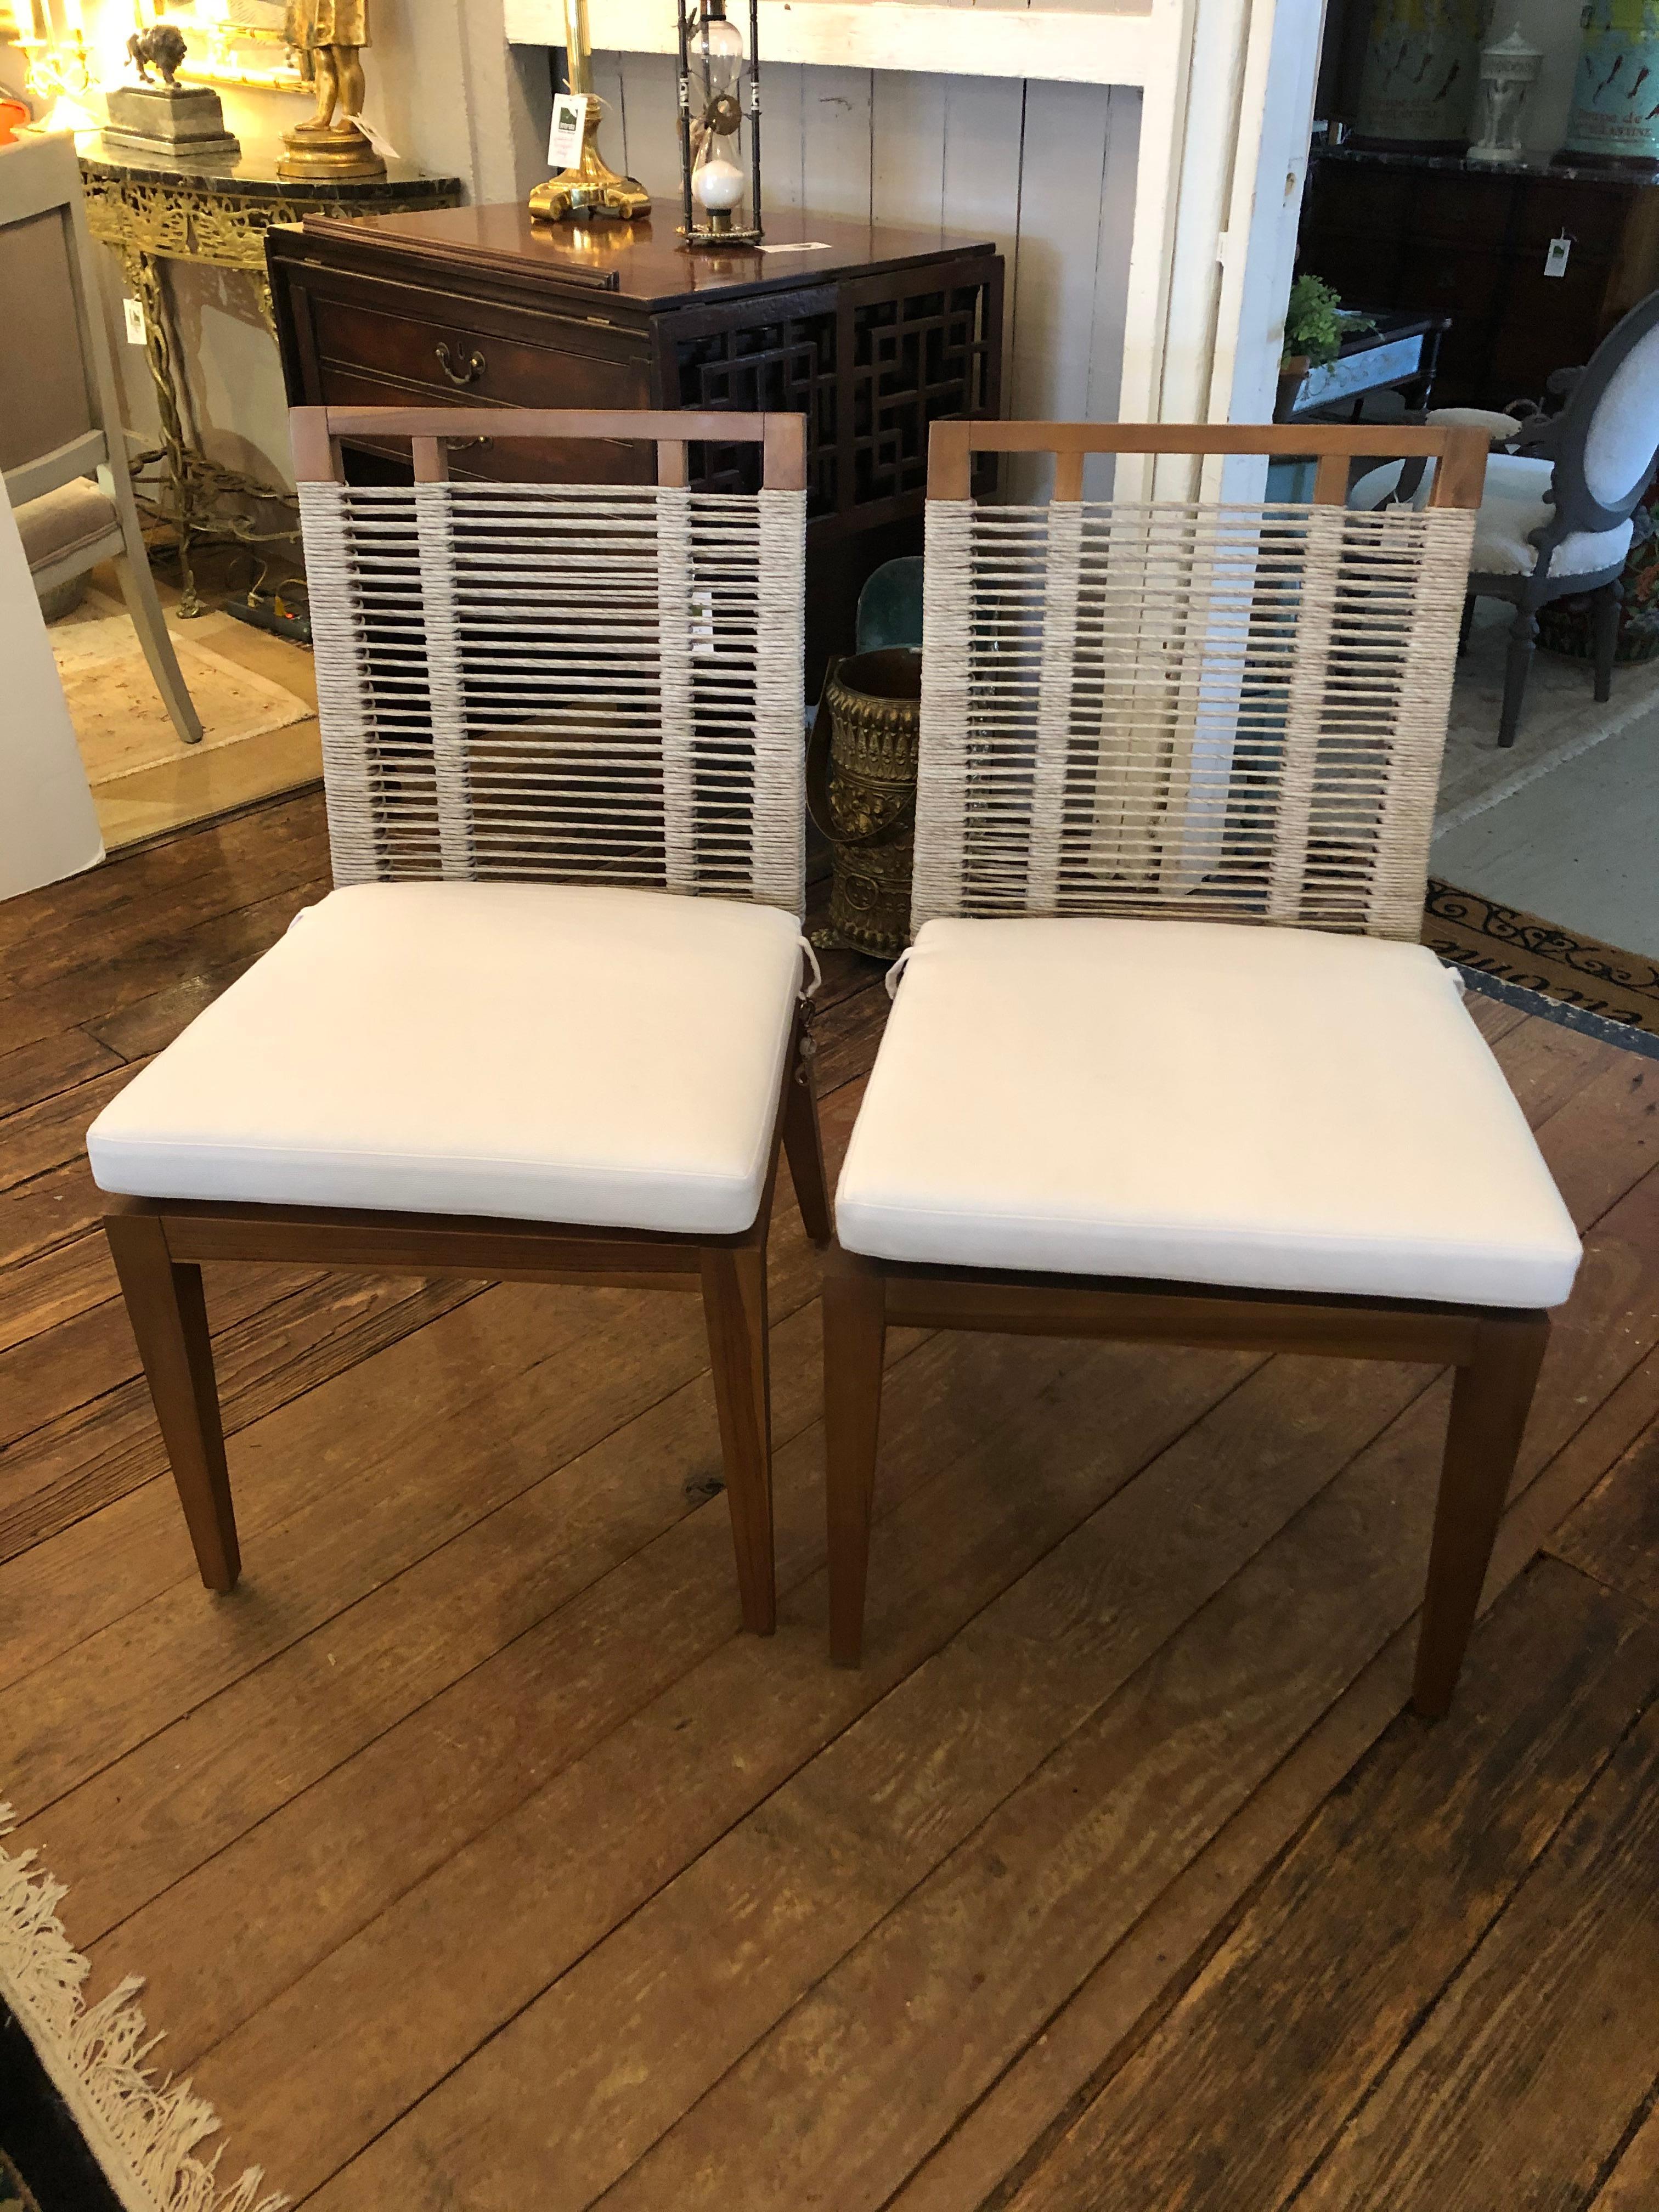 Beautifully made pair of contemporary side chairs having raffia rope woven seats and raffia rope entwined backs that are very comfortable but airy and see through. Custom white duck cushions are included.
Great at the head of a dining